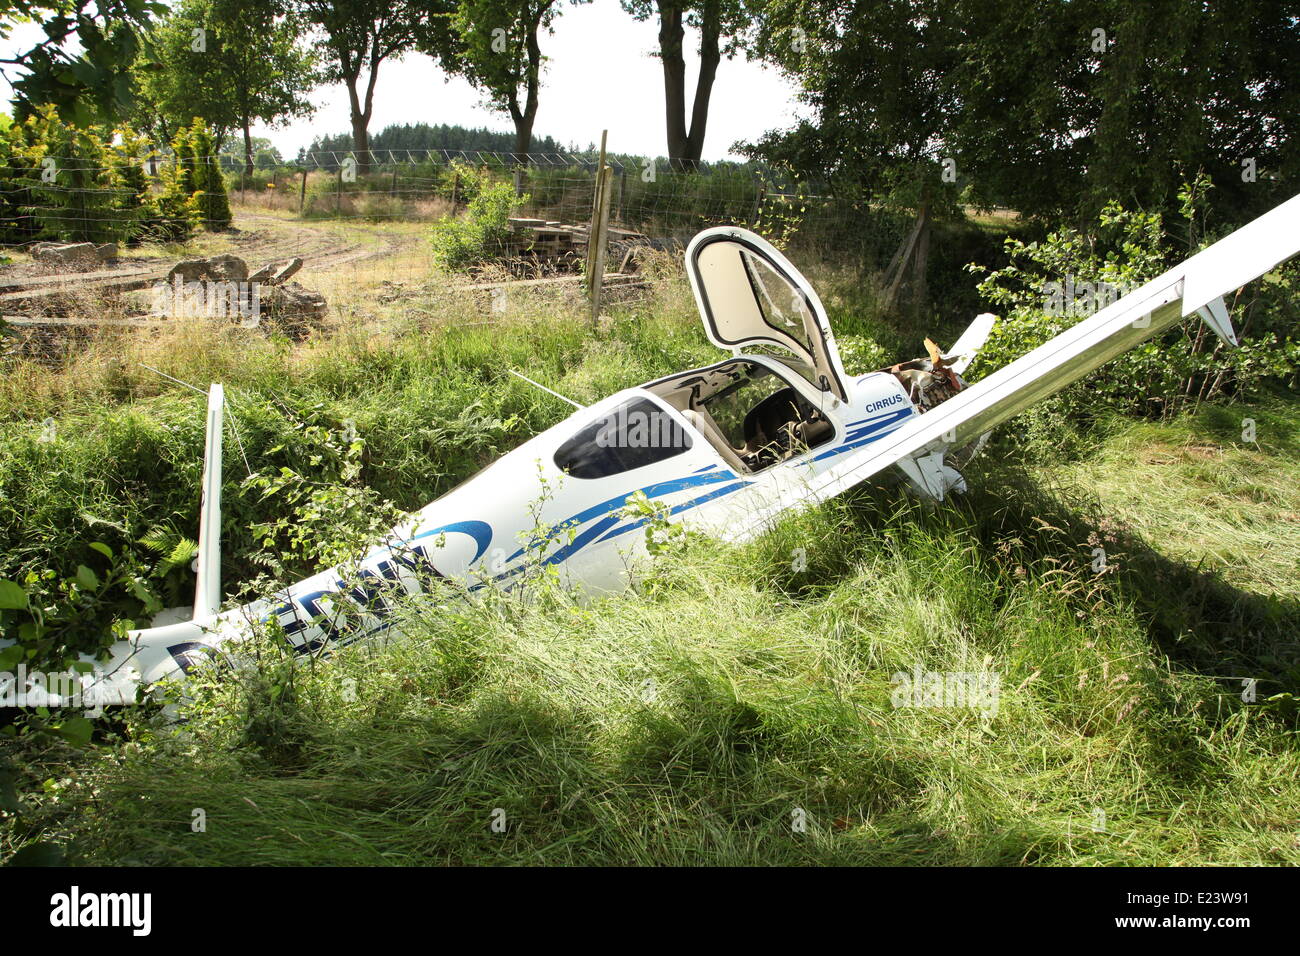 Westerstede-Felde, Germany. 15th June, 2014. A Cirrus SR20 small aircraft crashed after it approached for landing at the airfield in Westerstede-Felde, Germany, 15 June 2014. The four passengers suffered no harm. Photo: Florian Kater/dpa/Alamy Live News Stock Photo